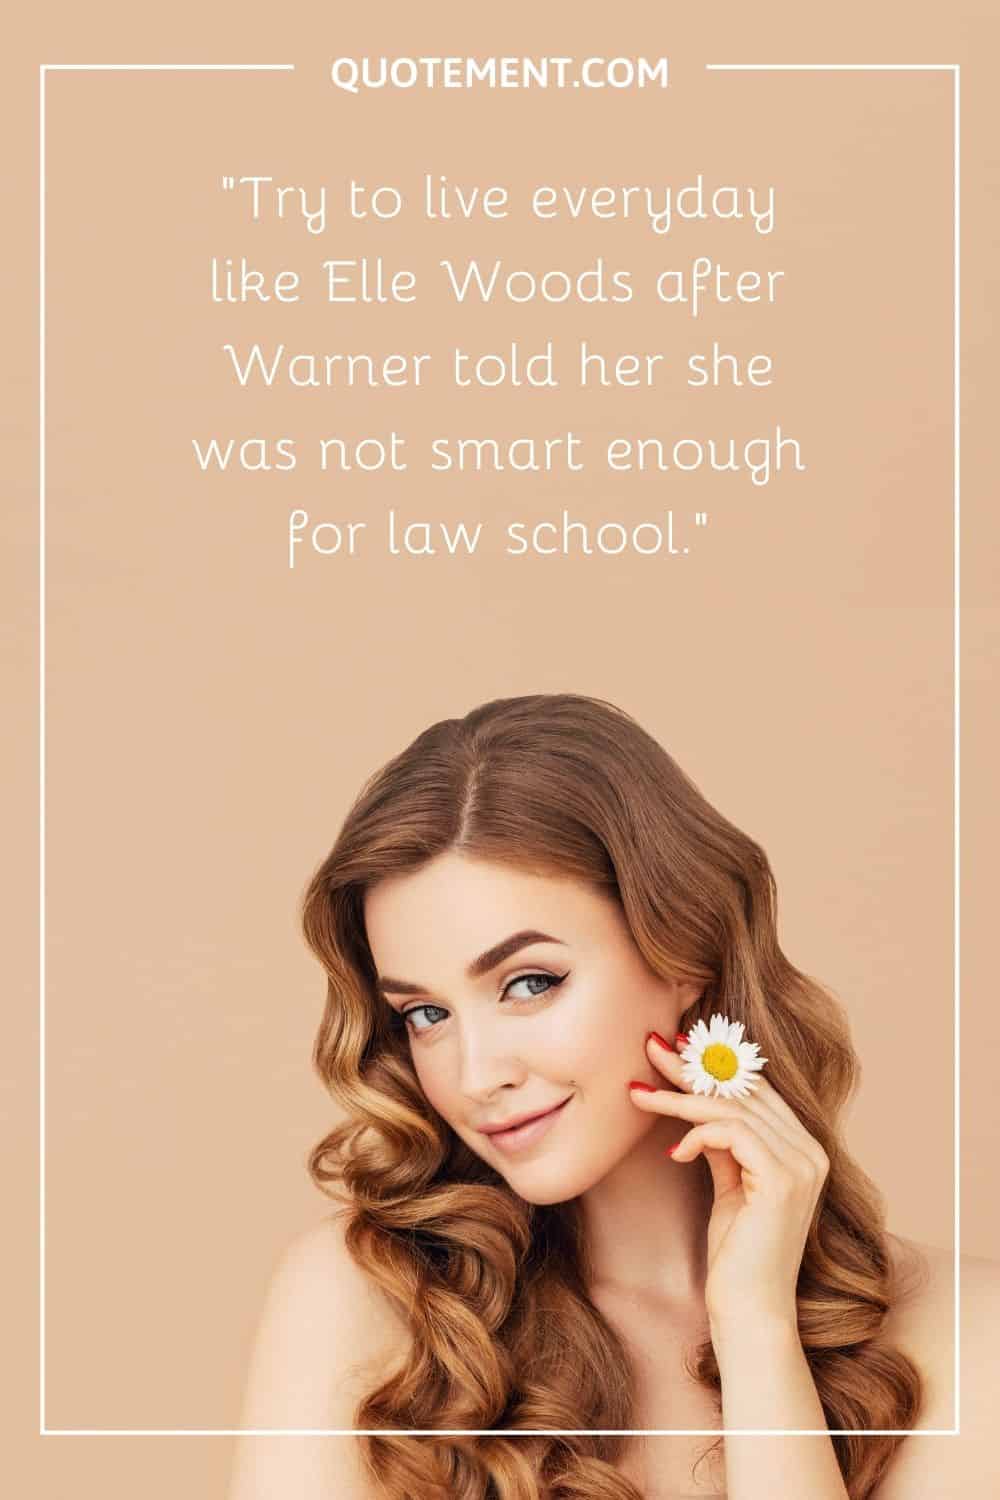 Try to live everyday like Elle Woods after Warner told her she was not smart enough for law school